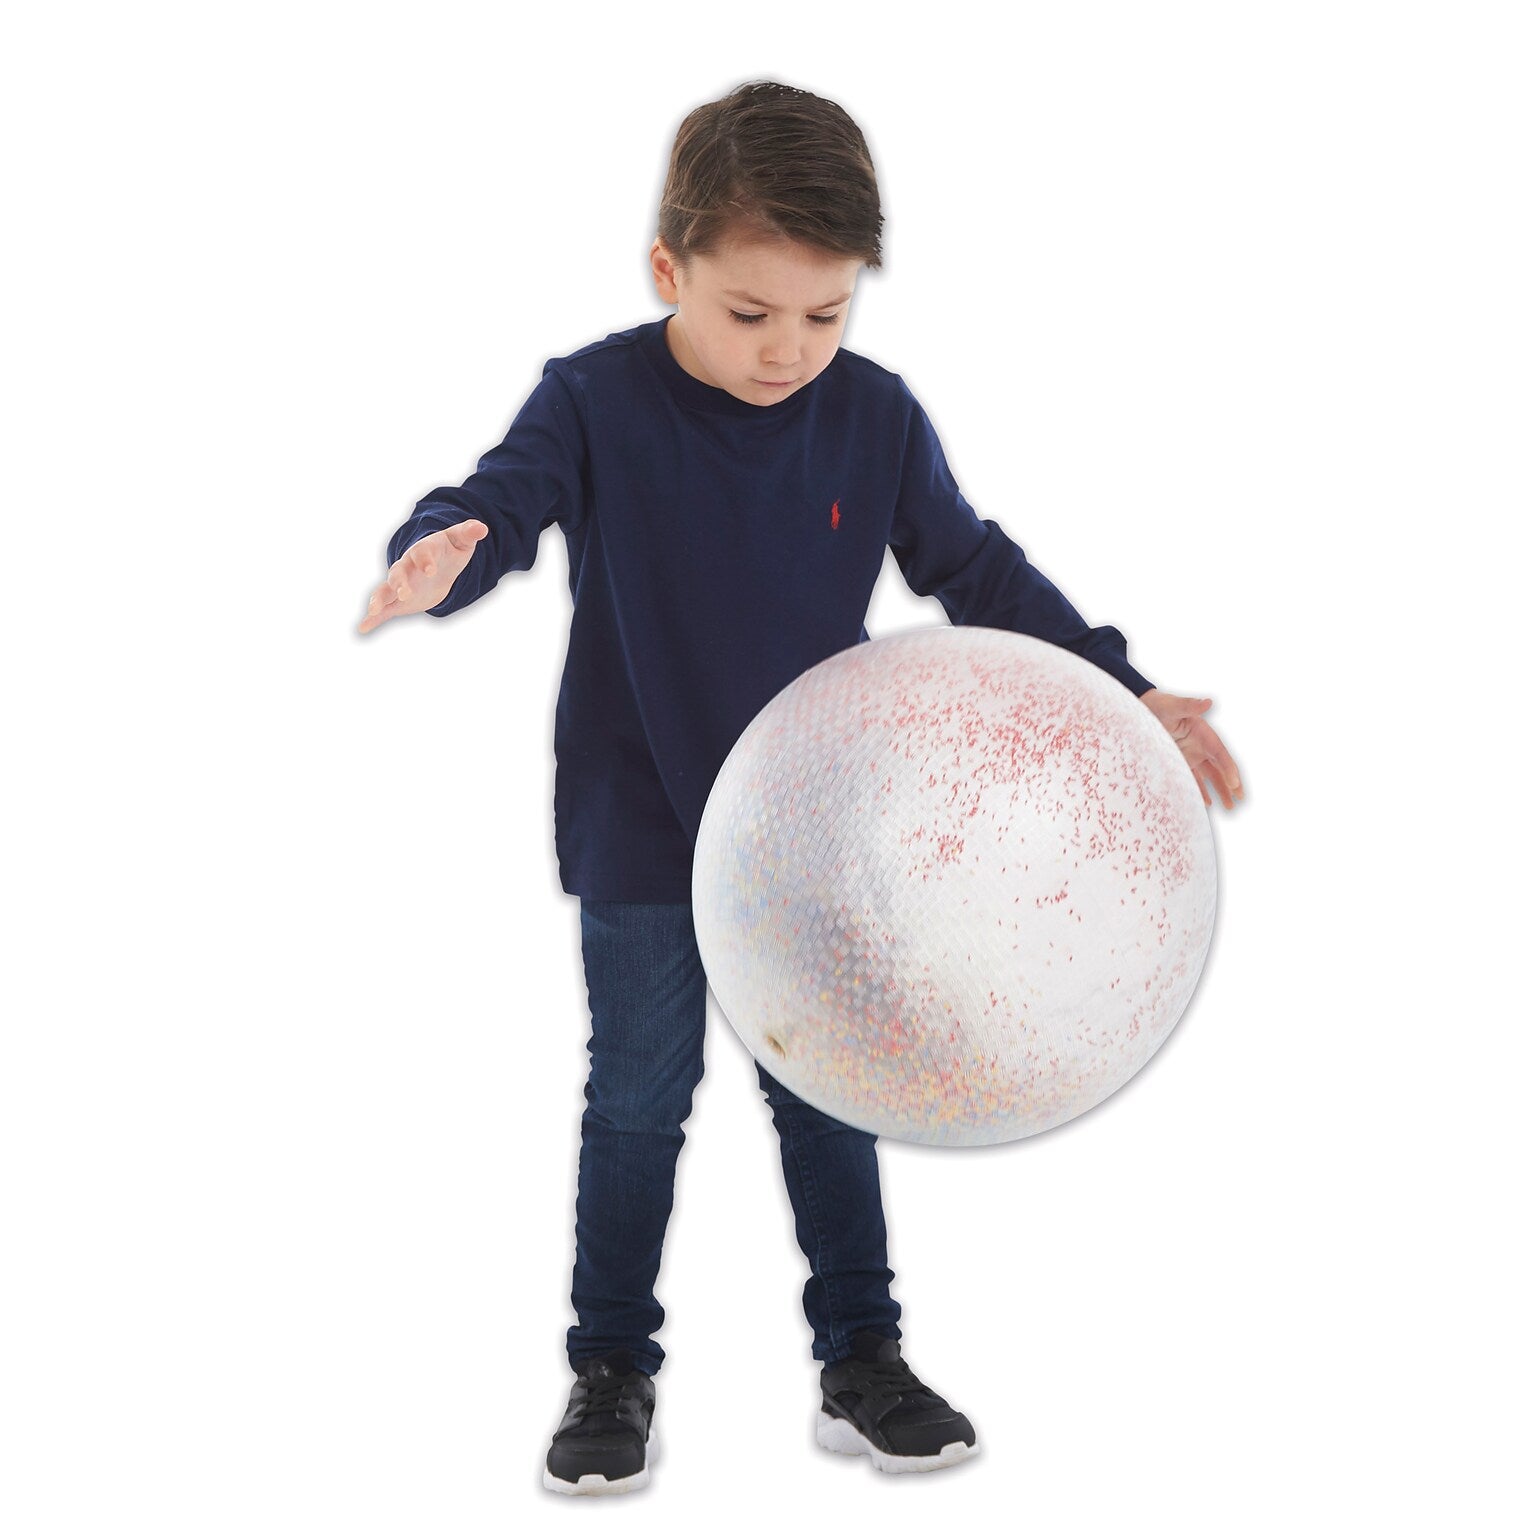 A child with light skin tone and short brown hair is bouncing the Constellation Sensory Ball.